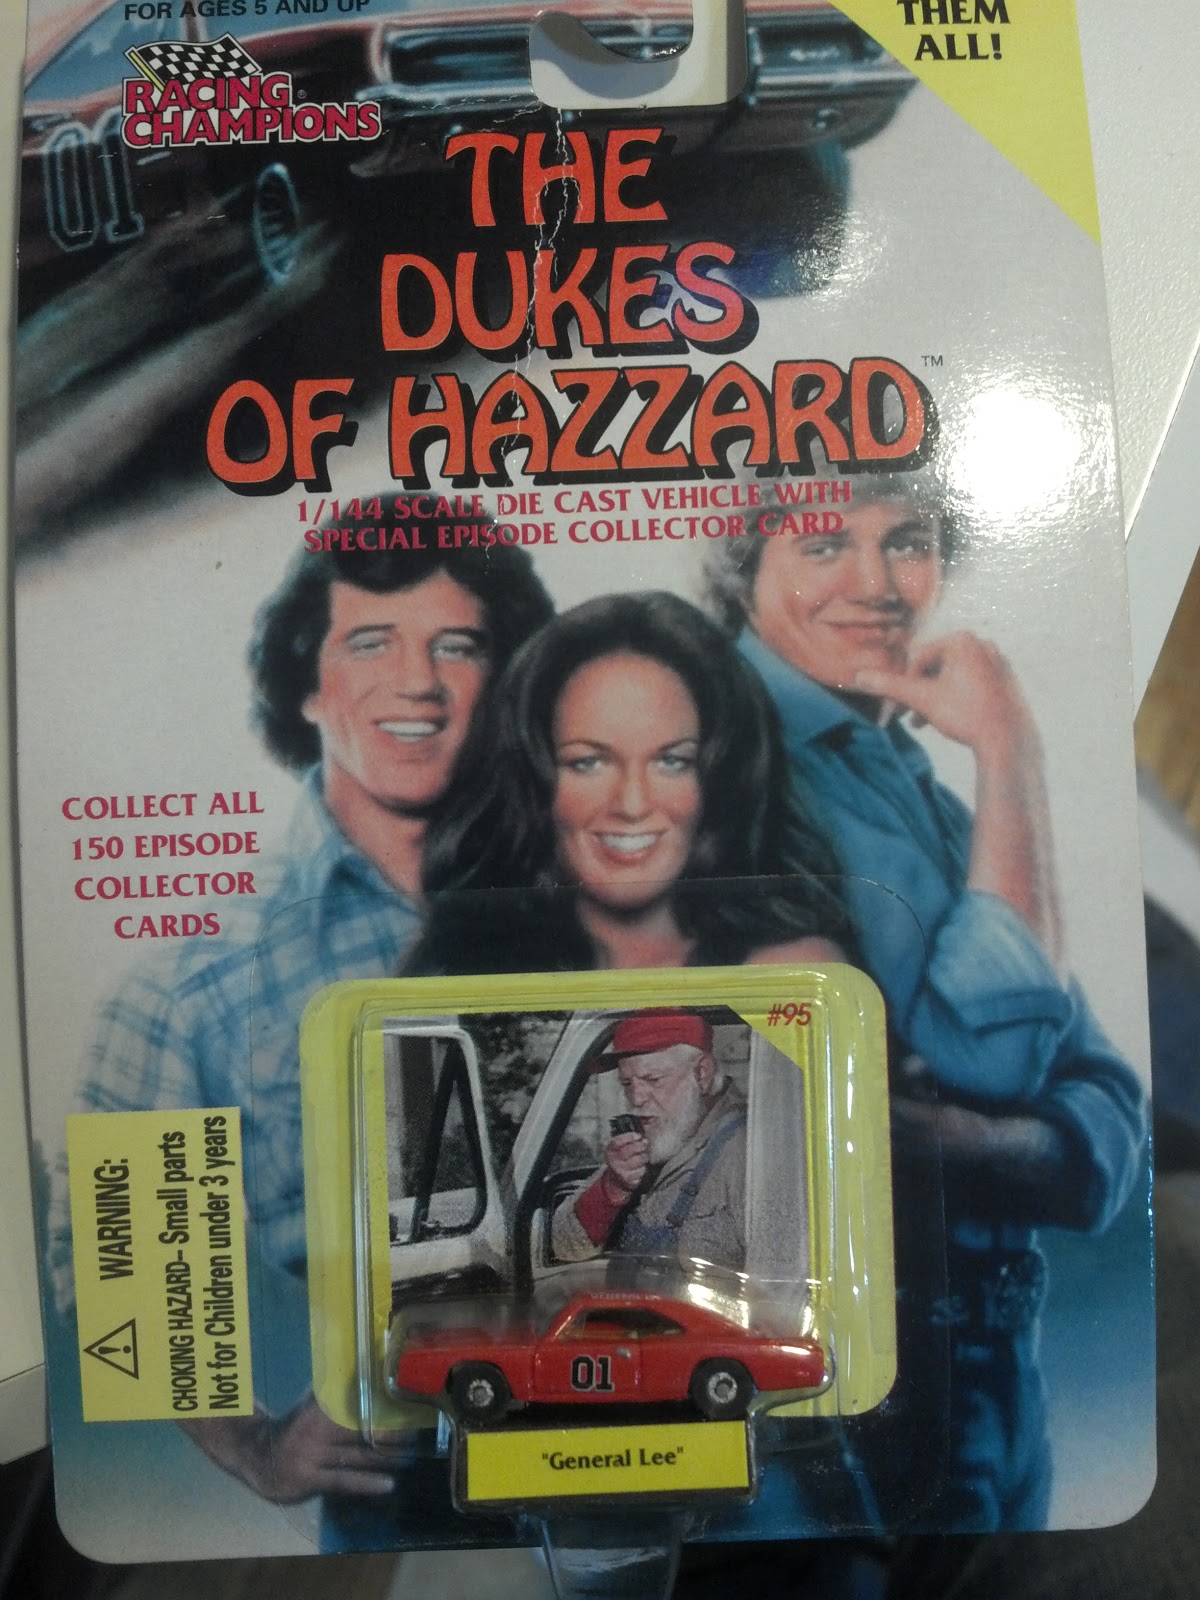 Dukes of Hazzard Collector: The White Whale - The Dukes of Hazzard